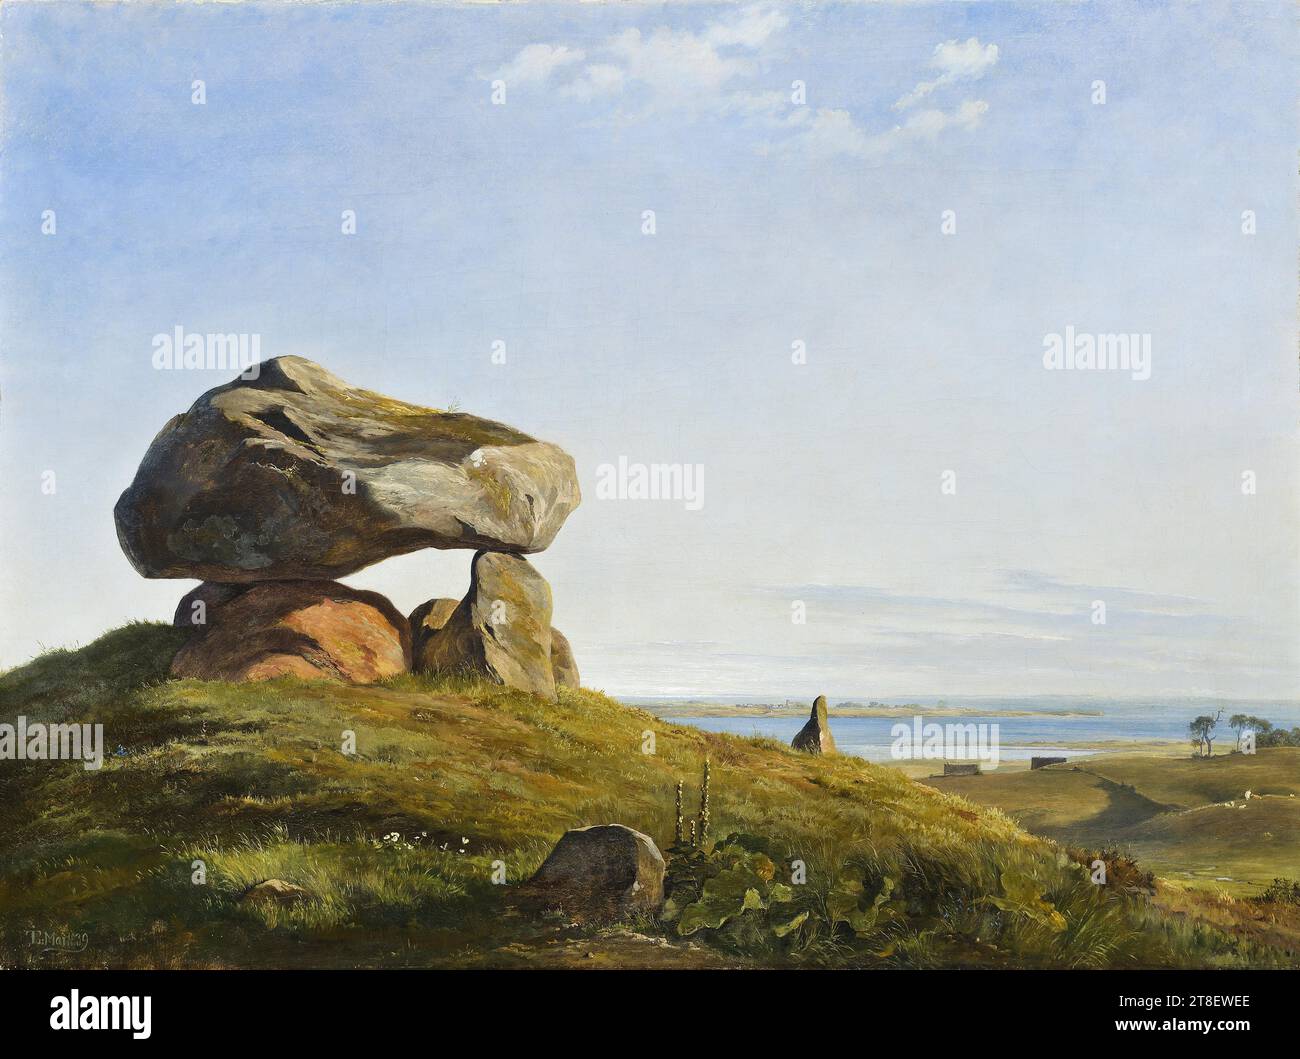 A Prehistoric Burial Mound by Raklev on Refsnæs, Johan Thomas Lundbye, 1818-1848, 1839, Painting, Lundbye’s links with Refsnæs go back to his earliest childhood. As a young captain, his father was in command of the fortifications at the far end of Refsnæs and in 1810 married the customs inspector’s daughter in nearby Kalundborg. This is where Lundbye was born, and although the family moved, he maintained a link with the area by virtue of his grandparents., Textile, Canvas, Color, Oil paint, Painted, Height 66.7 cm, Width 88.9 cm, JTL Mai 1839, Painting, European Stock Photo